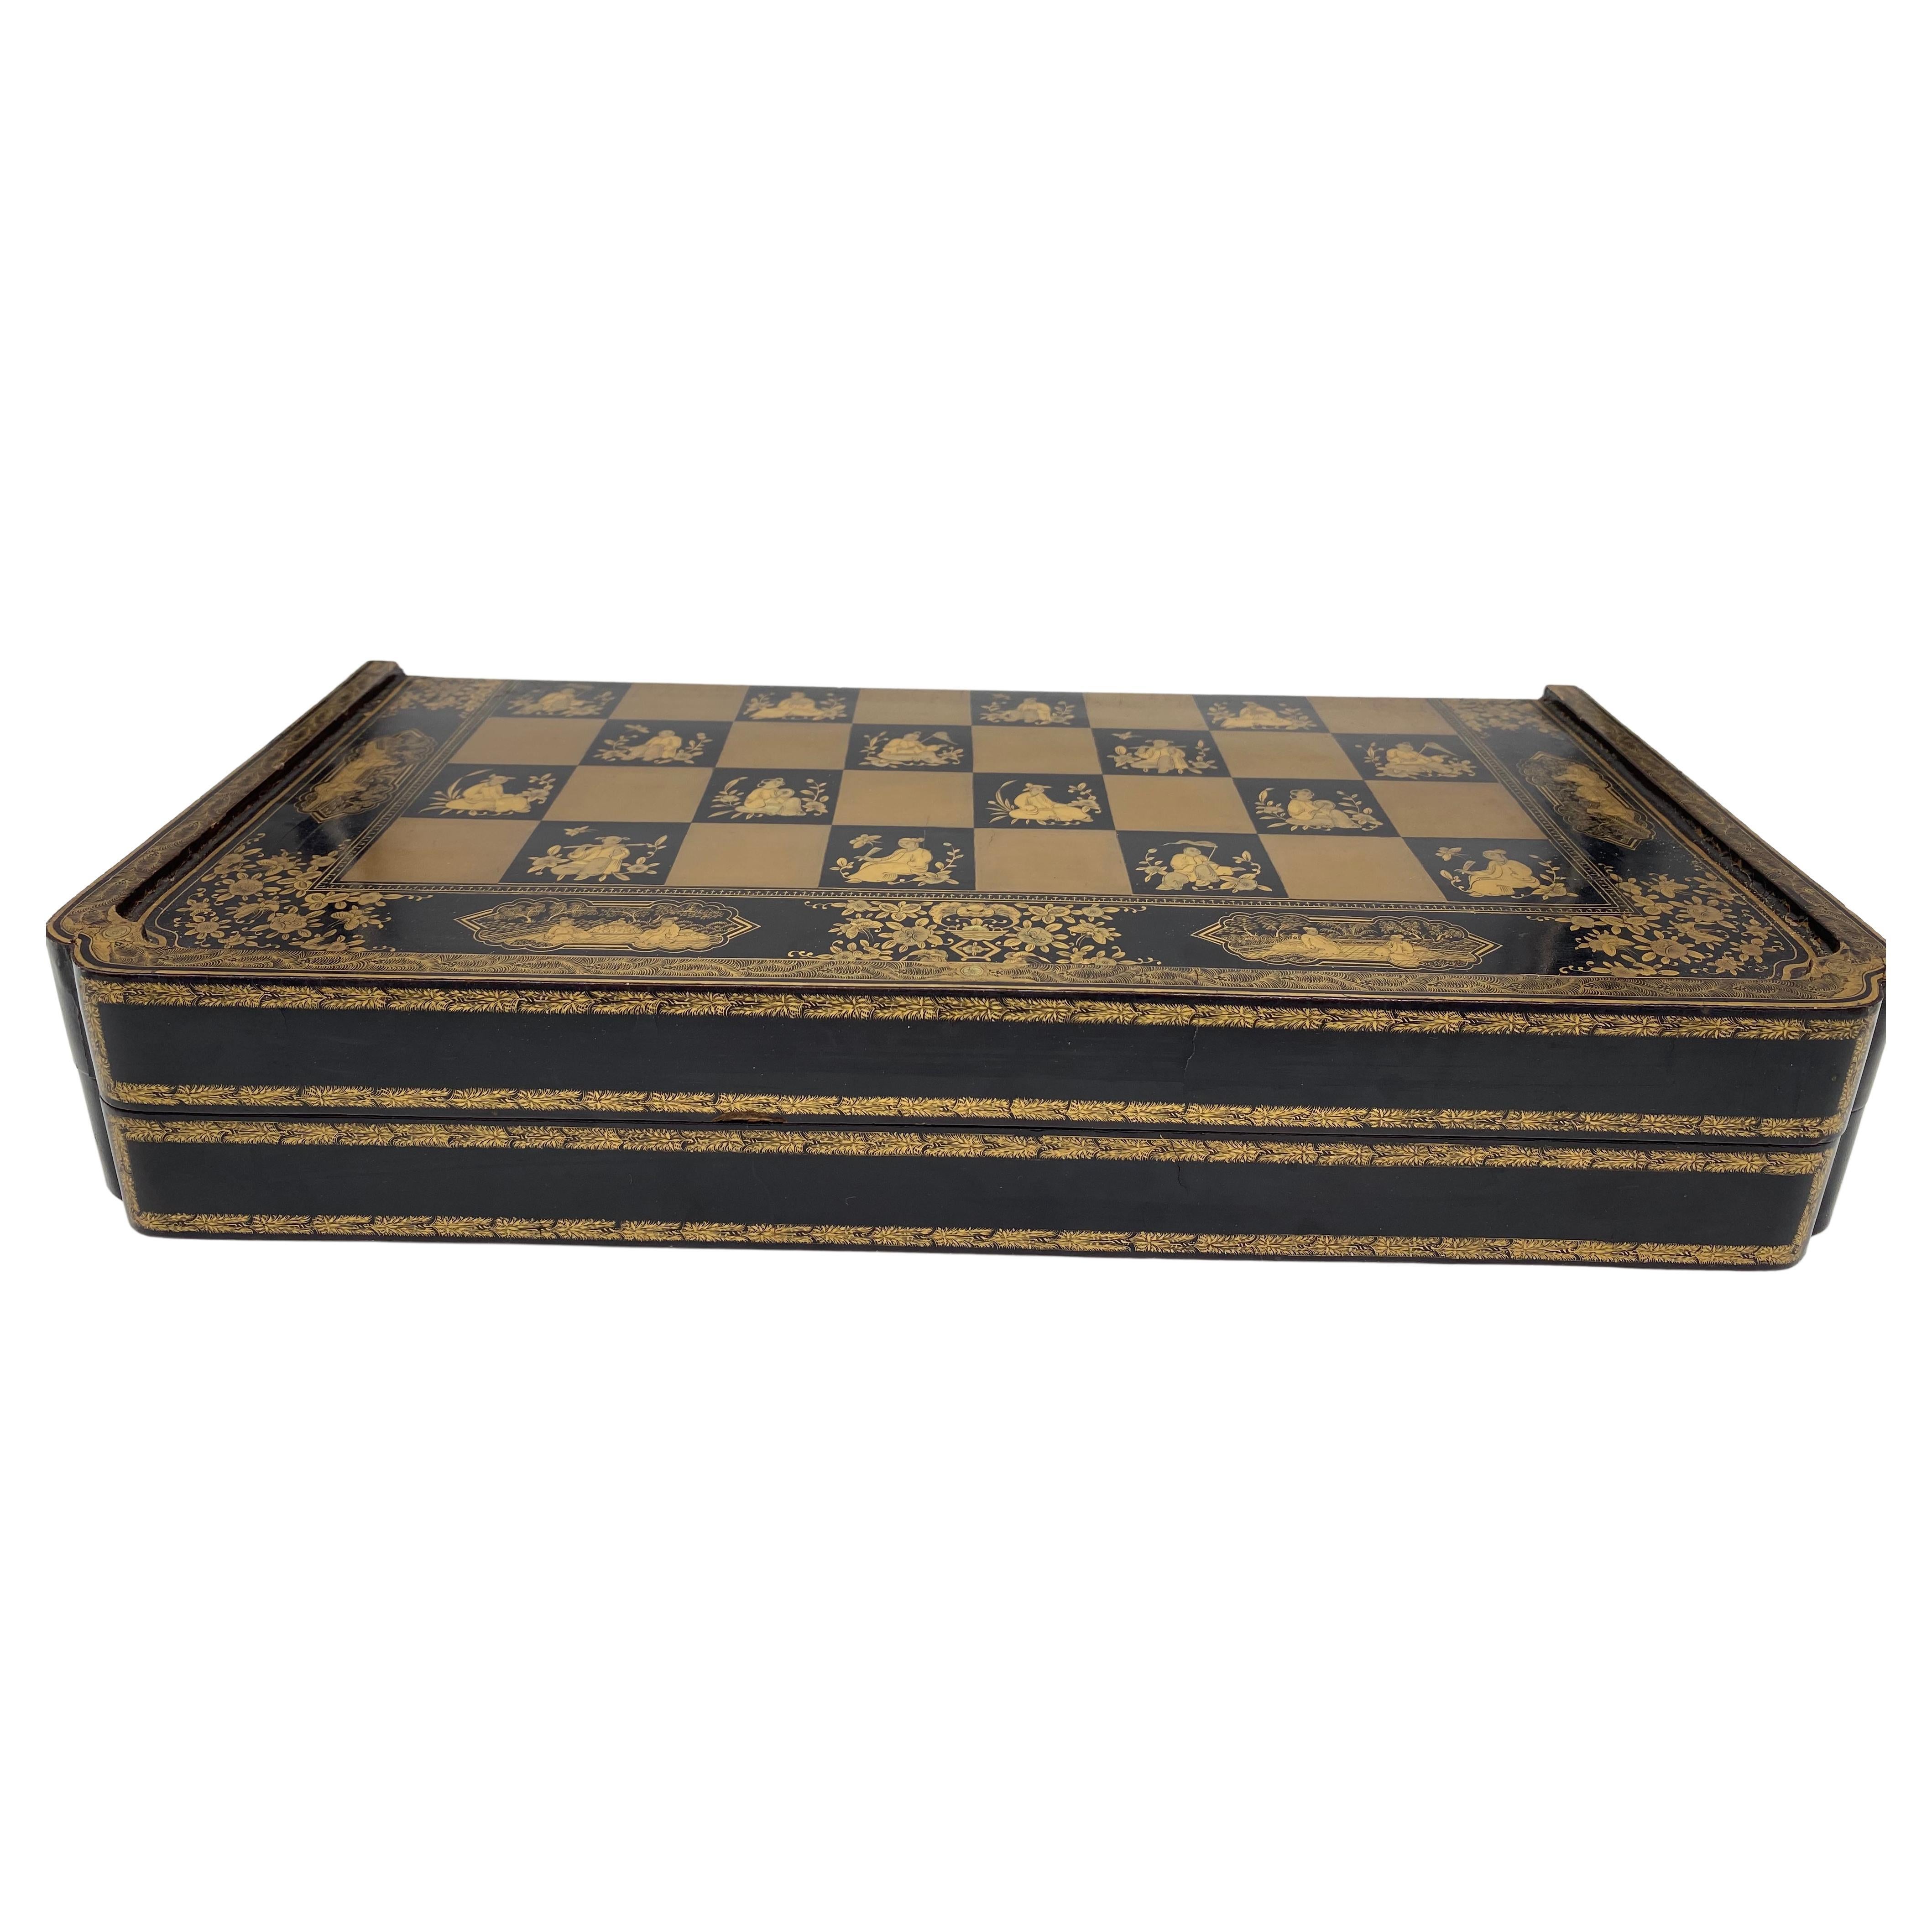 19th Century Chinese Lacquer Gaming Board